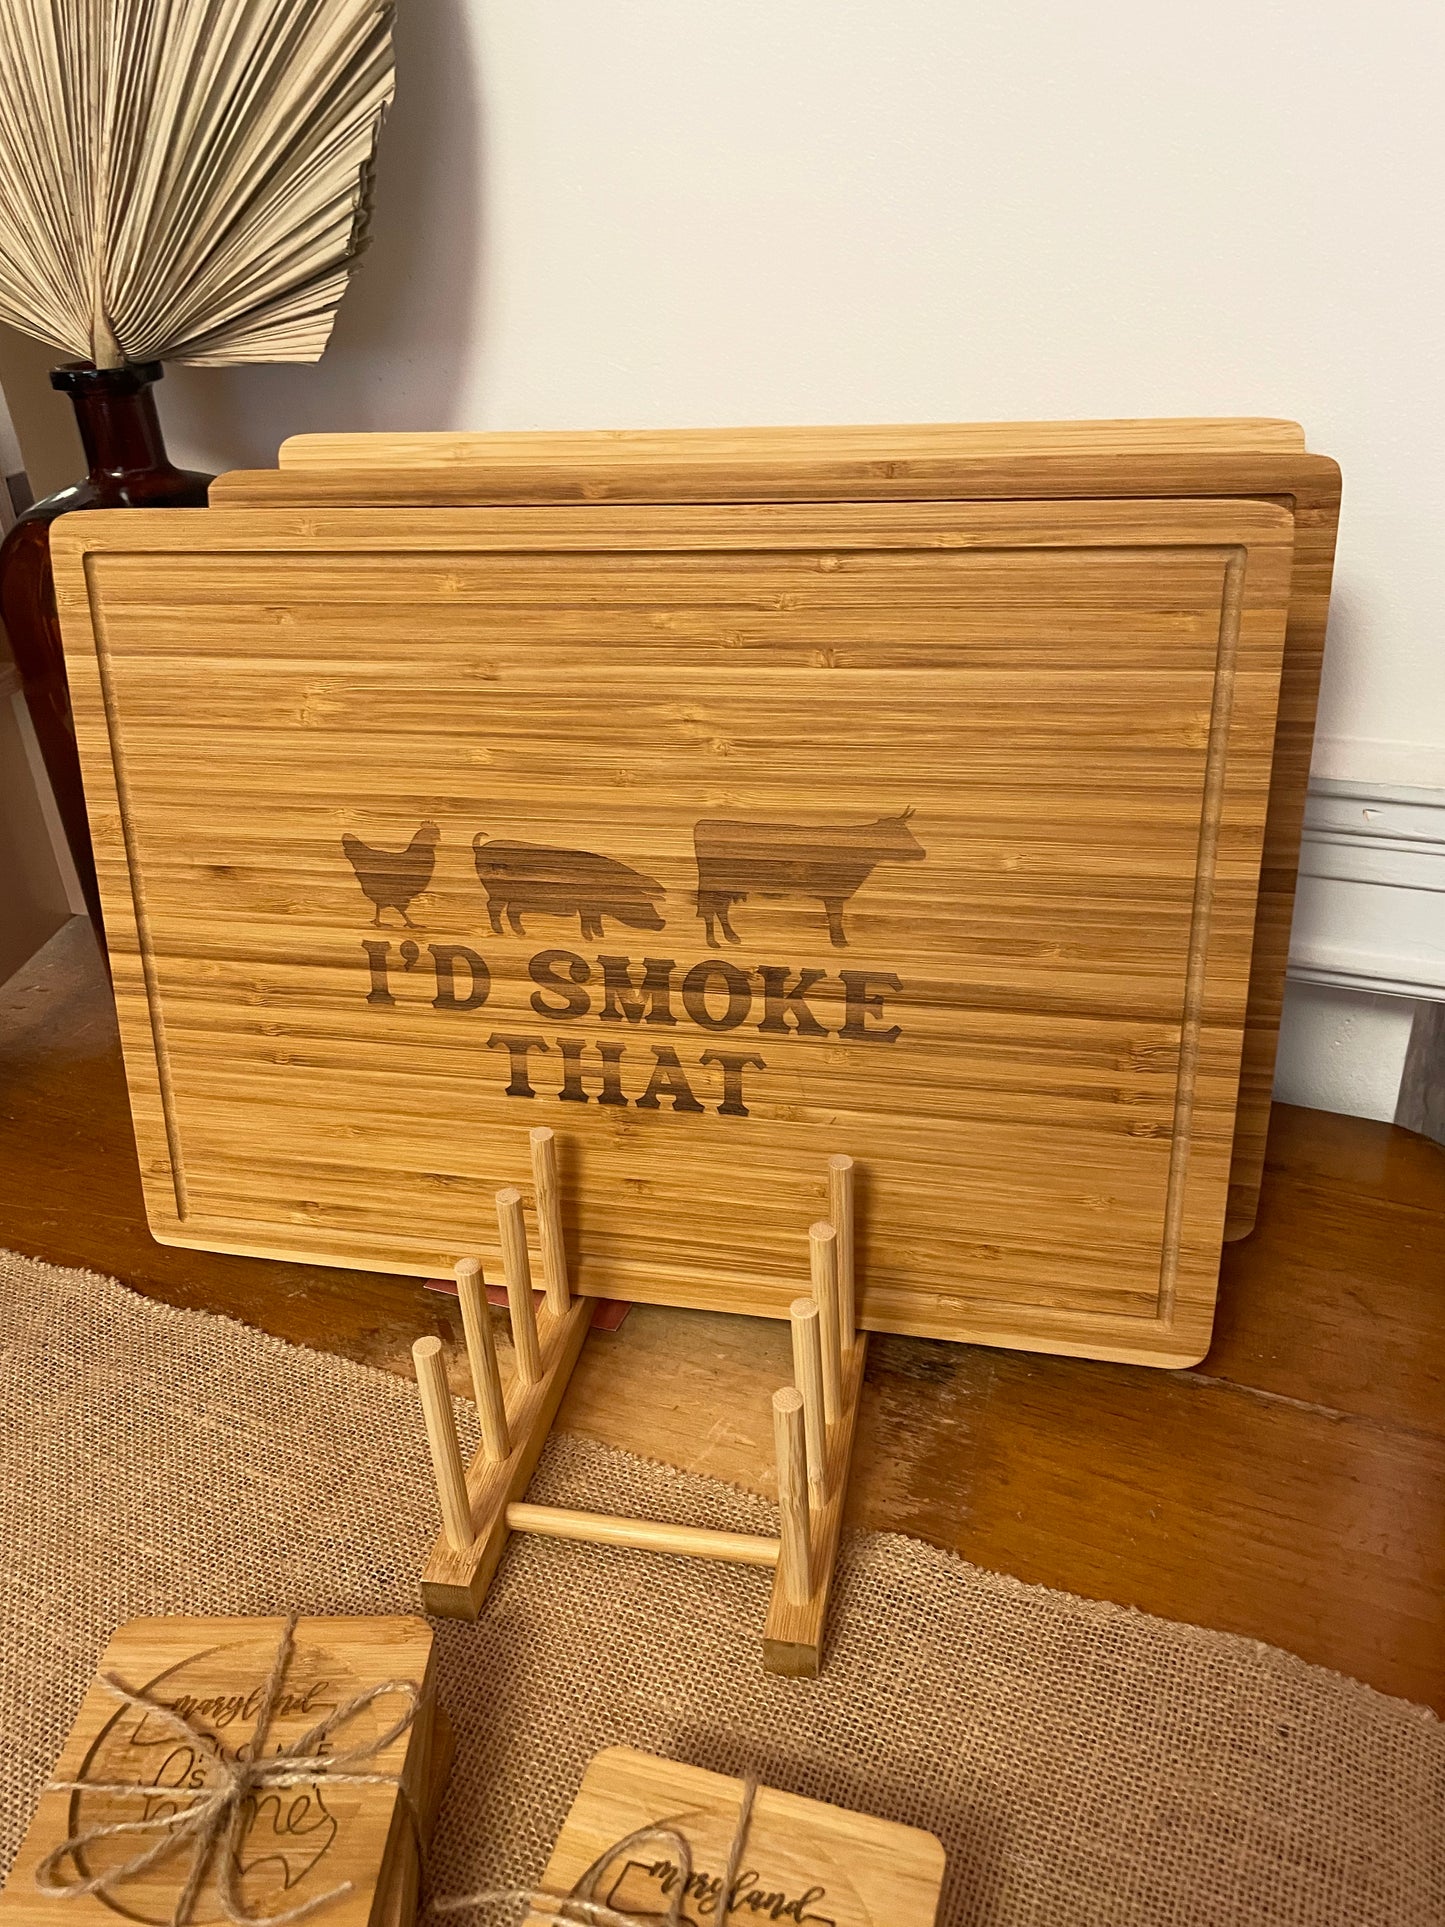 Engraved cutting boards